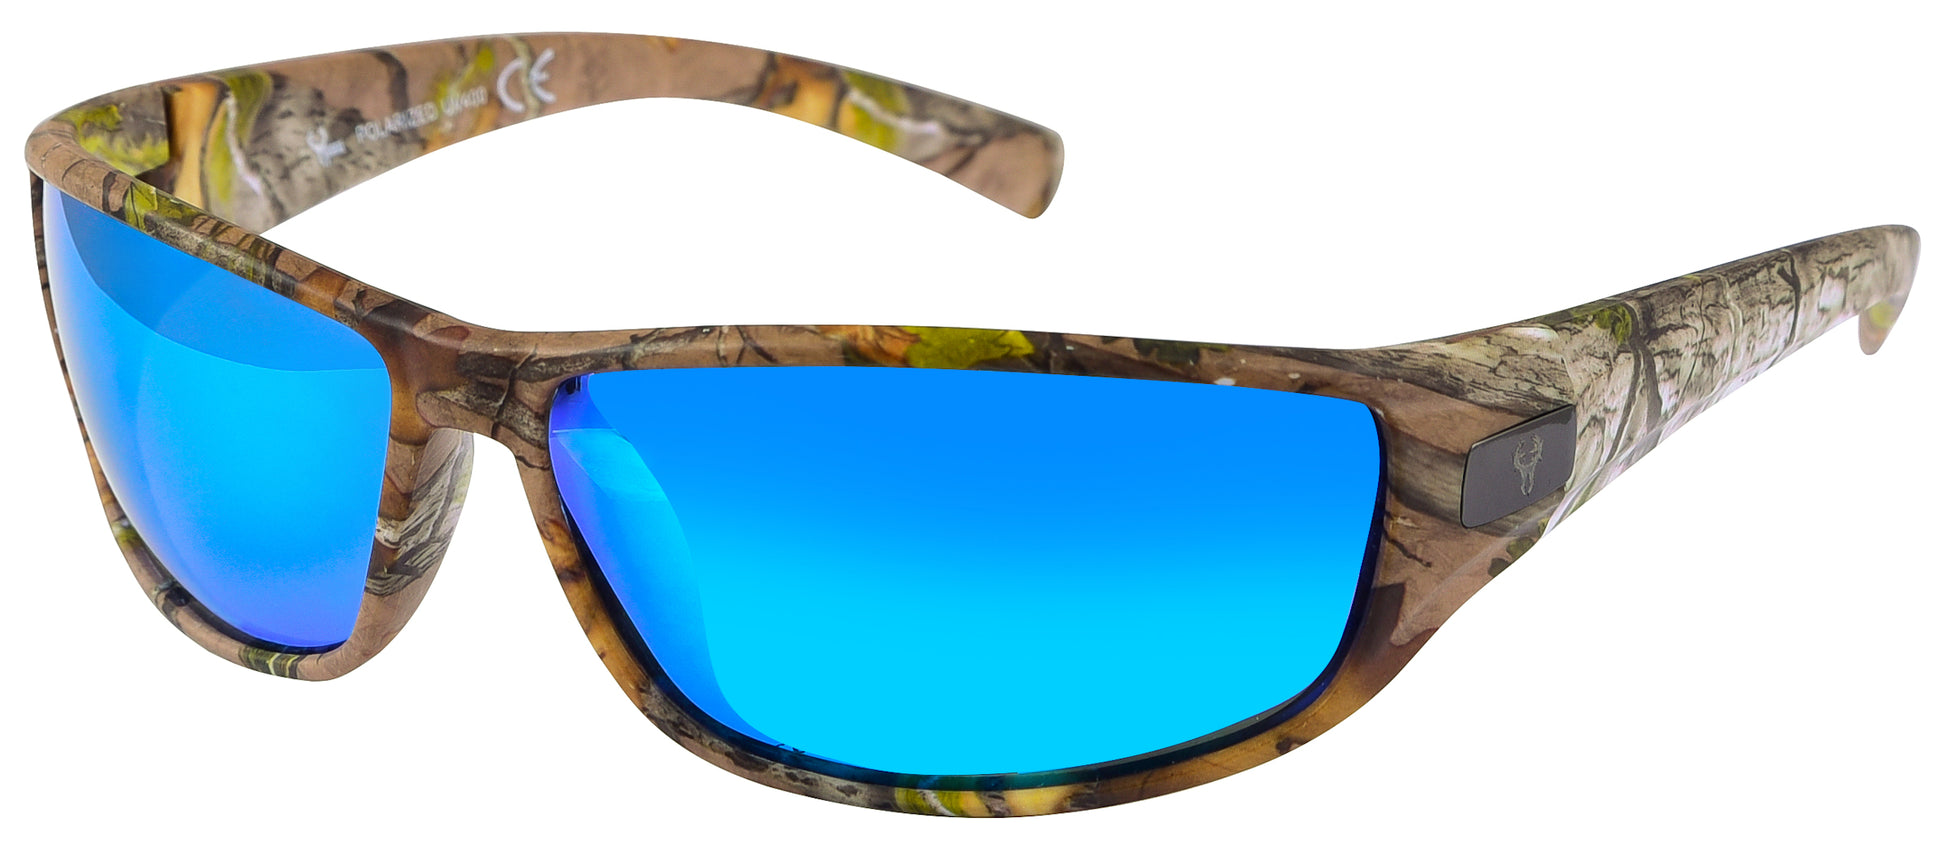 Hornz Brown Forest Camouflage Polarized Sunglasses for Men - Whitetail - Free Matching Microfiber Pouch - Brown Camo Frame - Ice Blue Lens